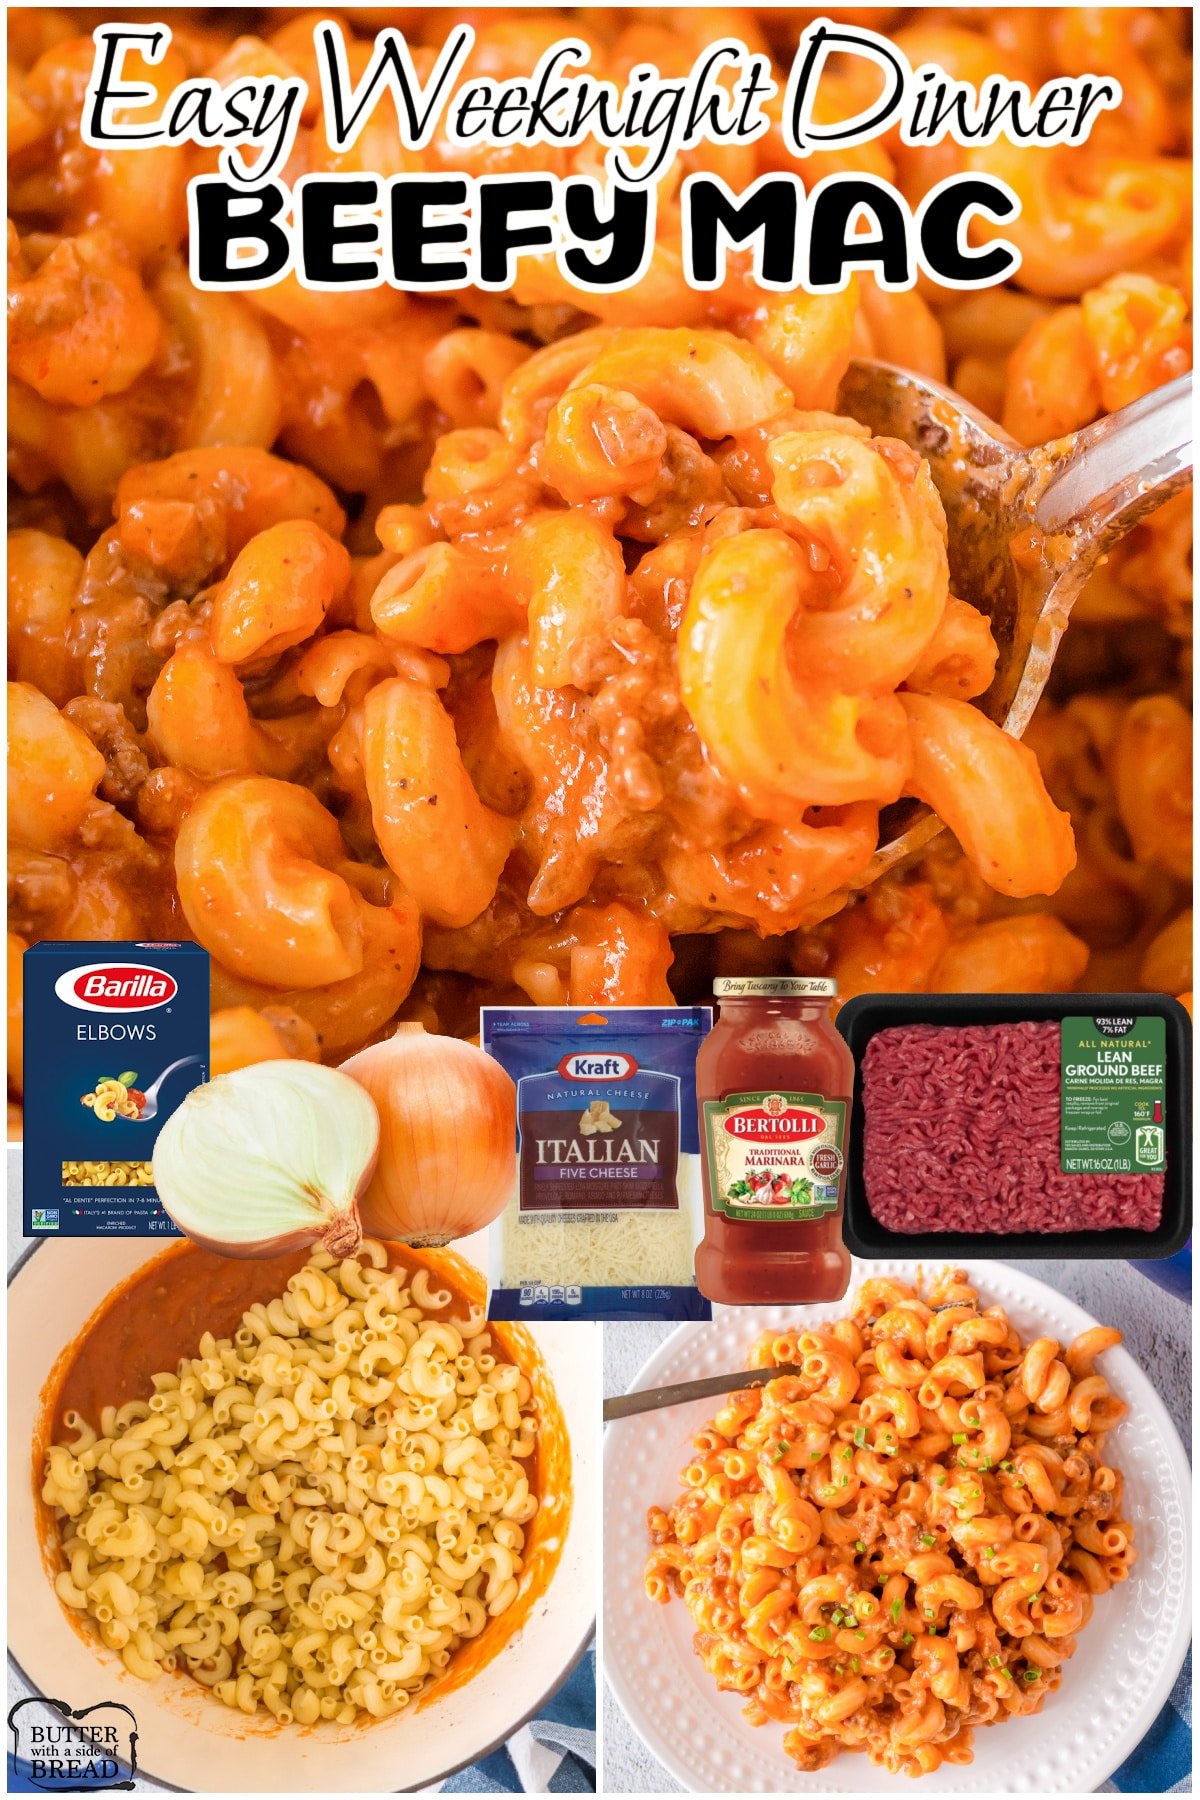 Beefy Mac Dinner made with pantry ingredients & served topped with plenty of cheese in 35 minutes! Hearty weeknight pasta everyone enjoys!